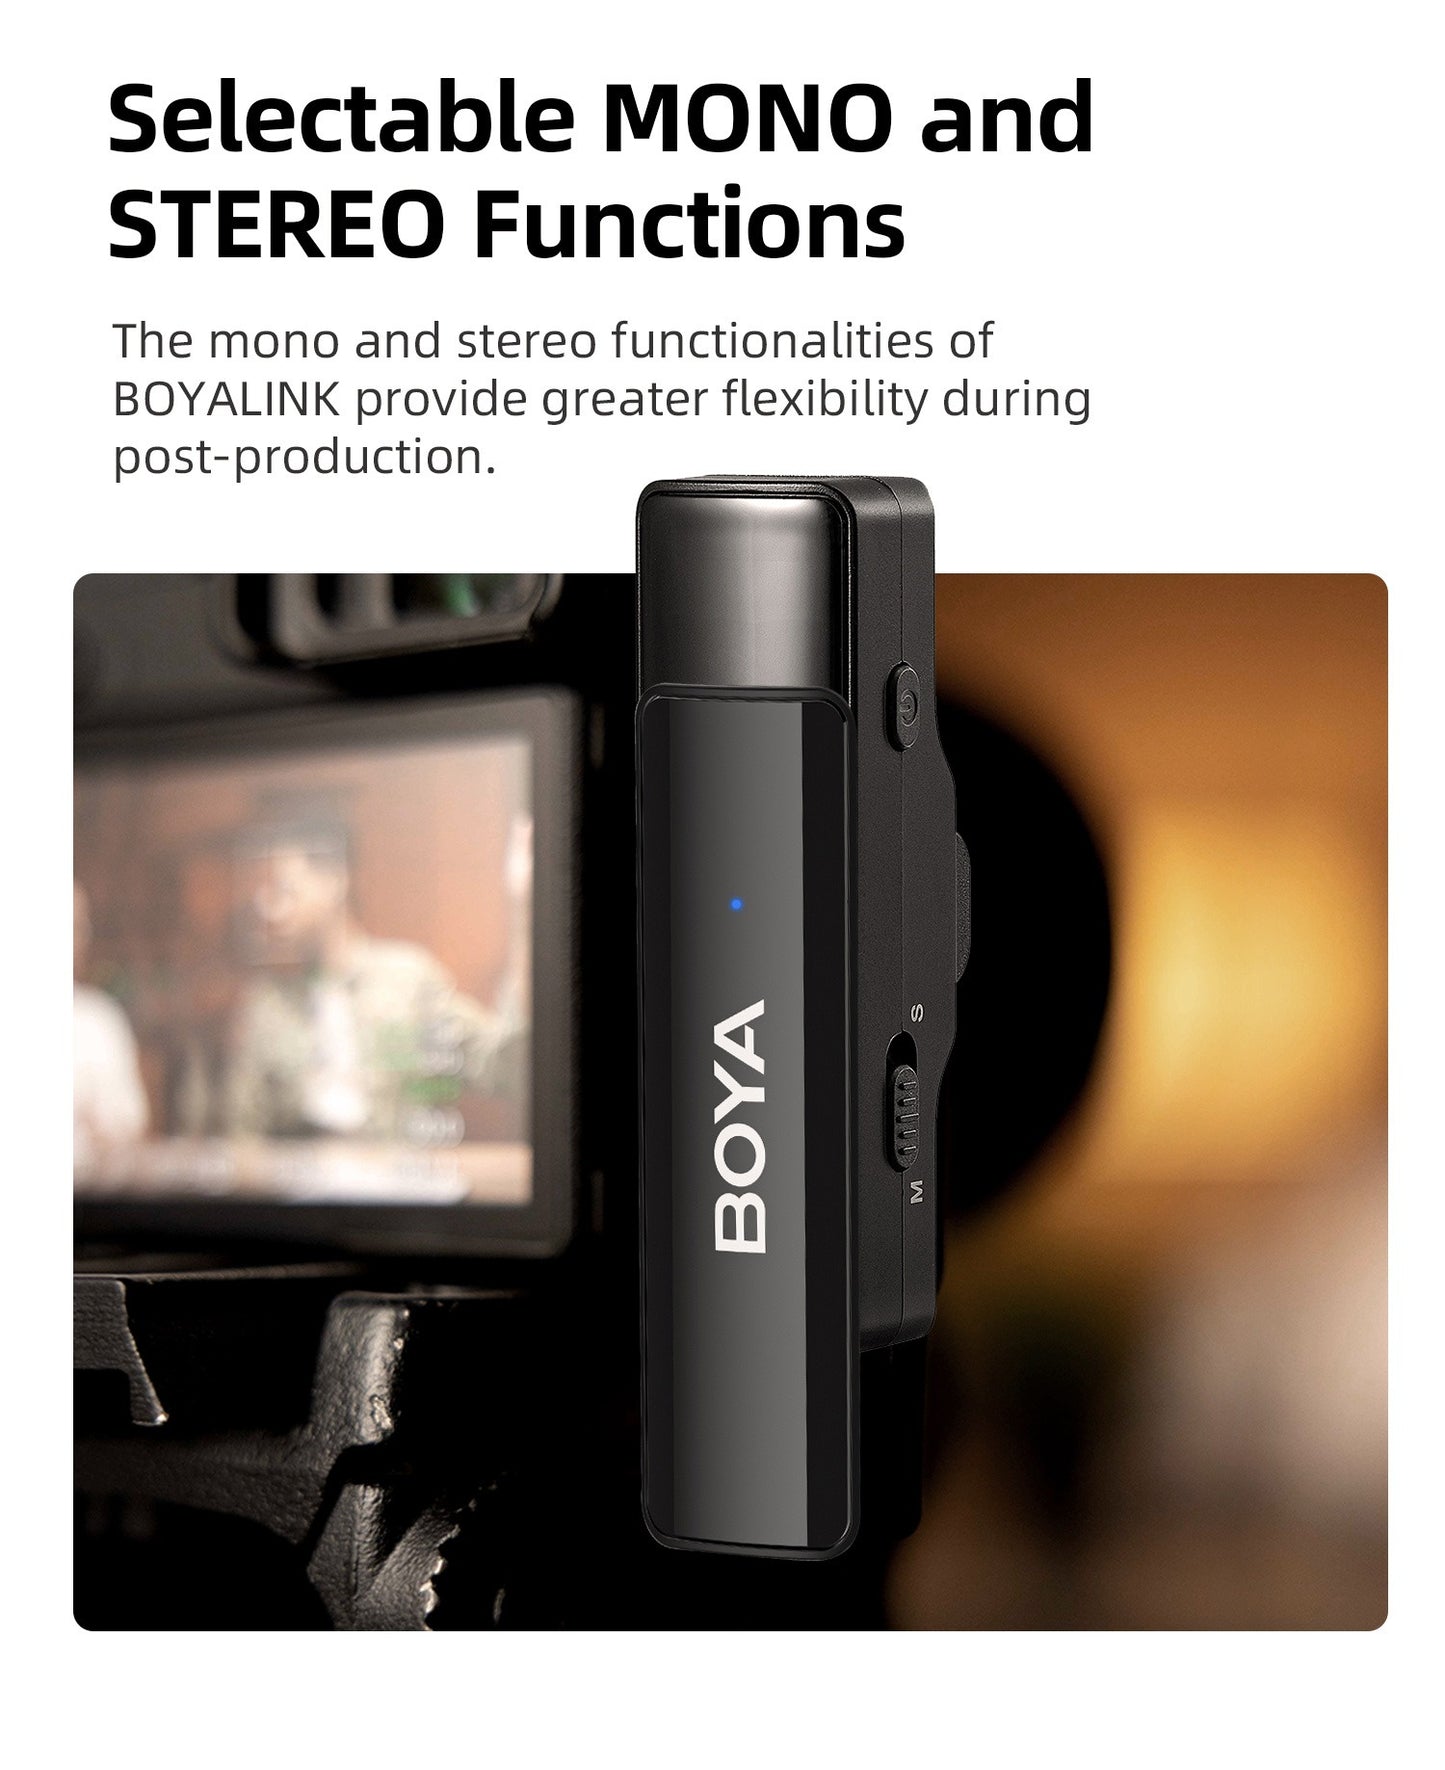 BOYA Boyalink A1 / A2 Multicompatible 2.4GHz Wireless Omnidirectional Microphone System w/ USB Type-C, Lightning, 3.5mm TRS Connectors, Bypass Charging, Noise Reduction, Gain Control, Mono / Stereo, 100M Max Range for Vlogging, Interviews